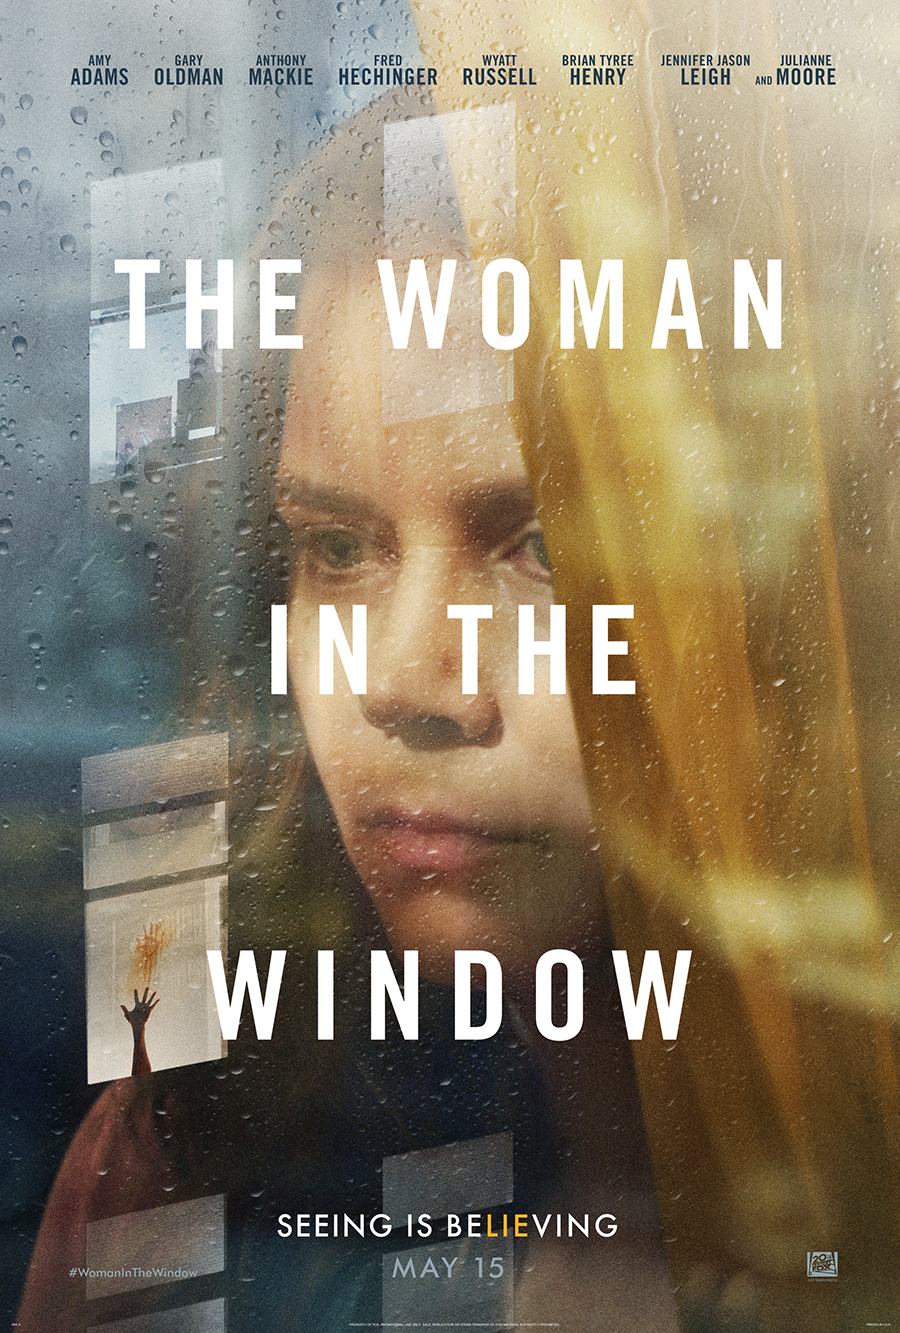 "The Woman In The Window" starring Amy Adams